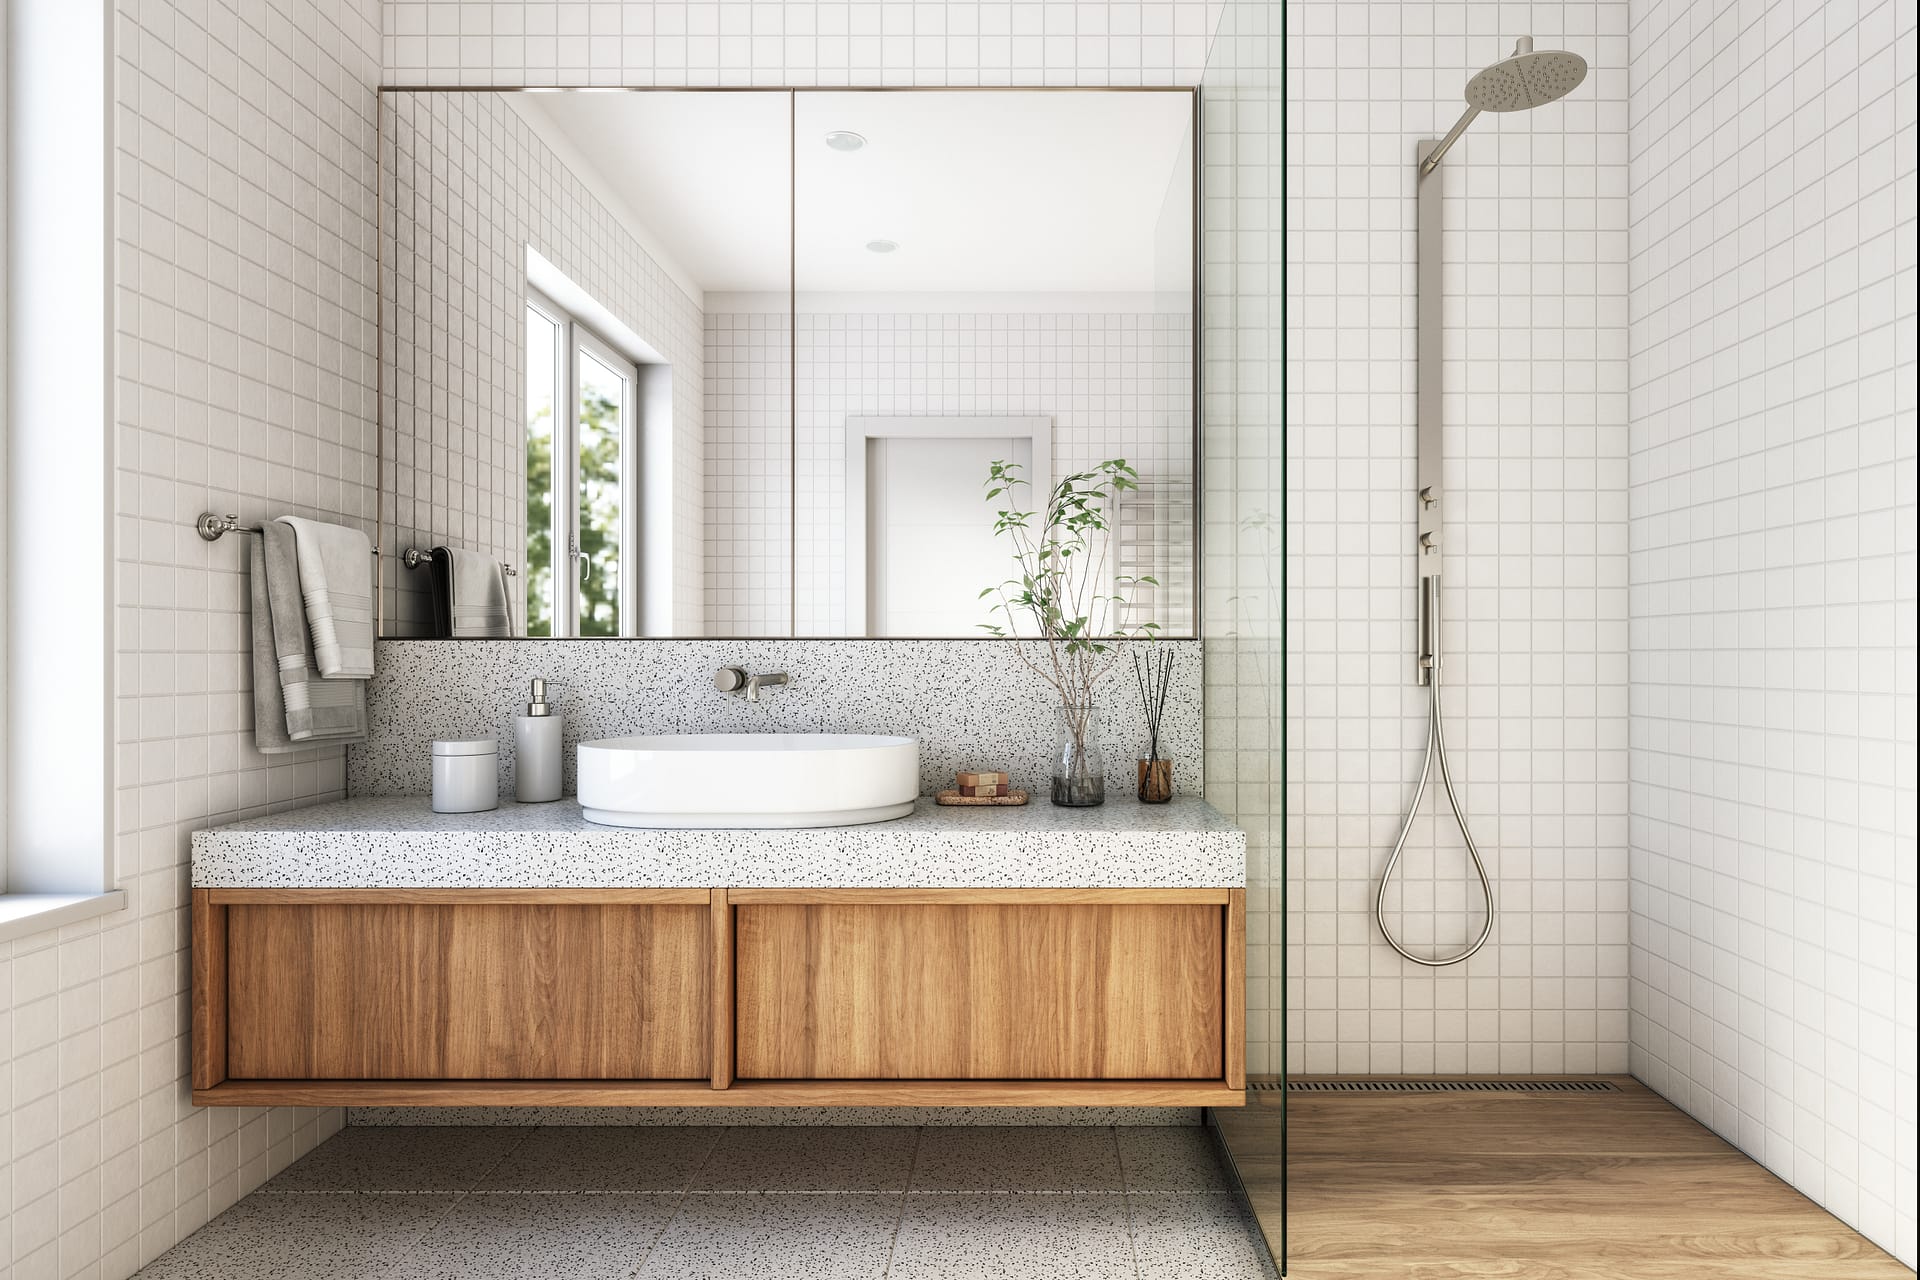 Transform Your Bathroom Hassle-Free with Qld Bathroom Renovations – Your Trusted Partner for Gold Coast Renovations!